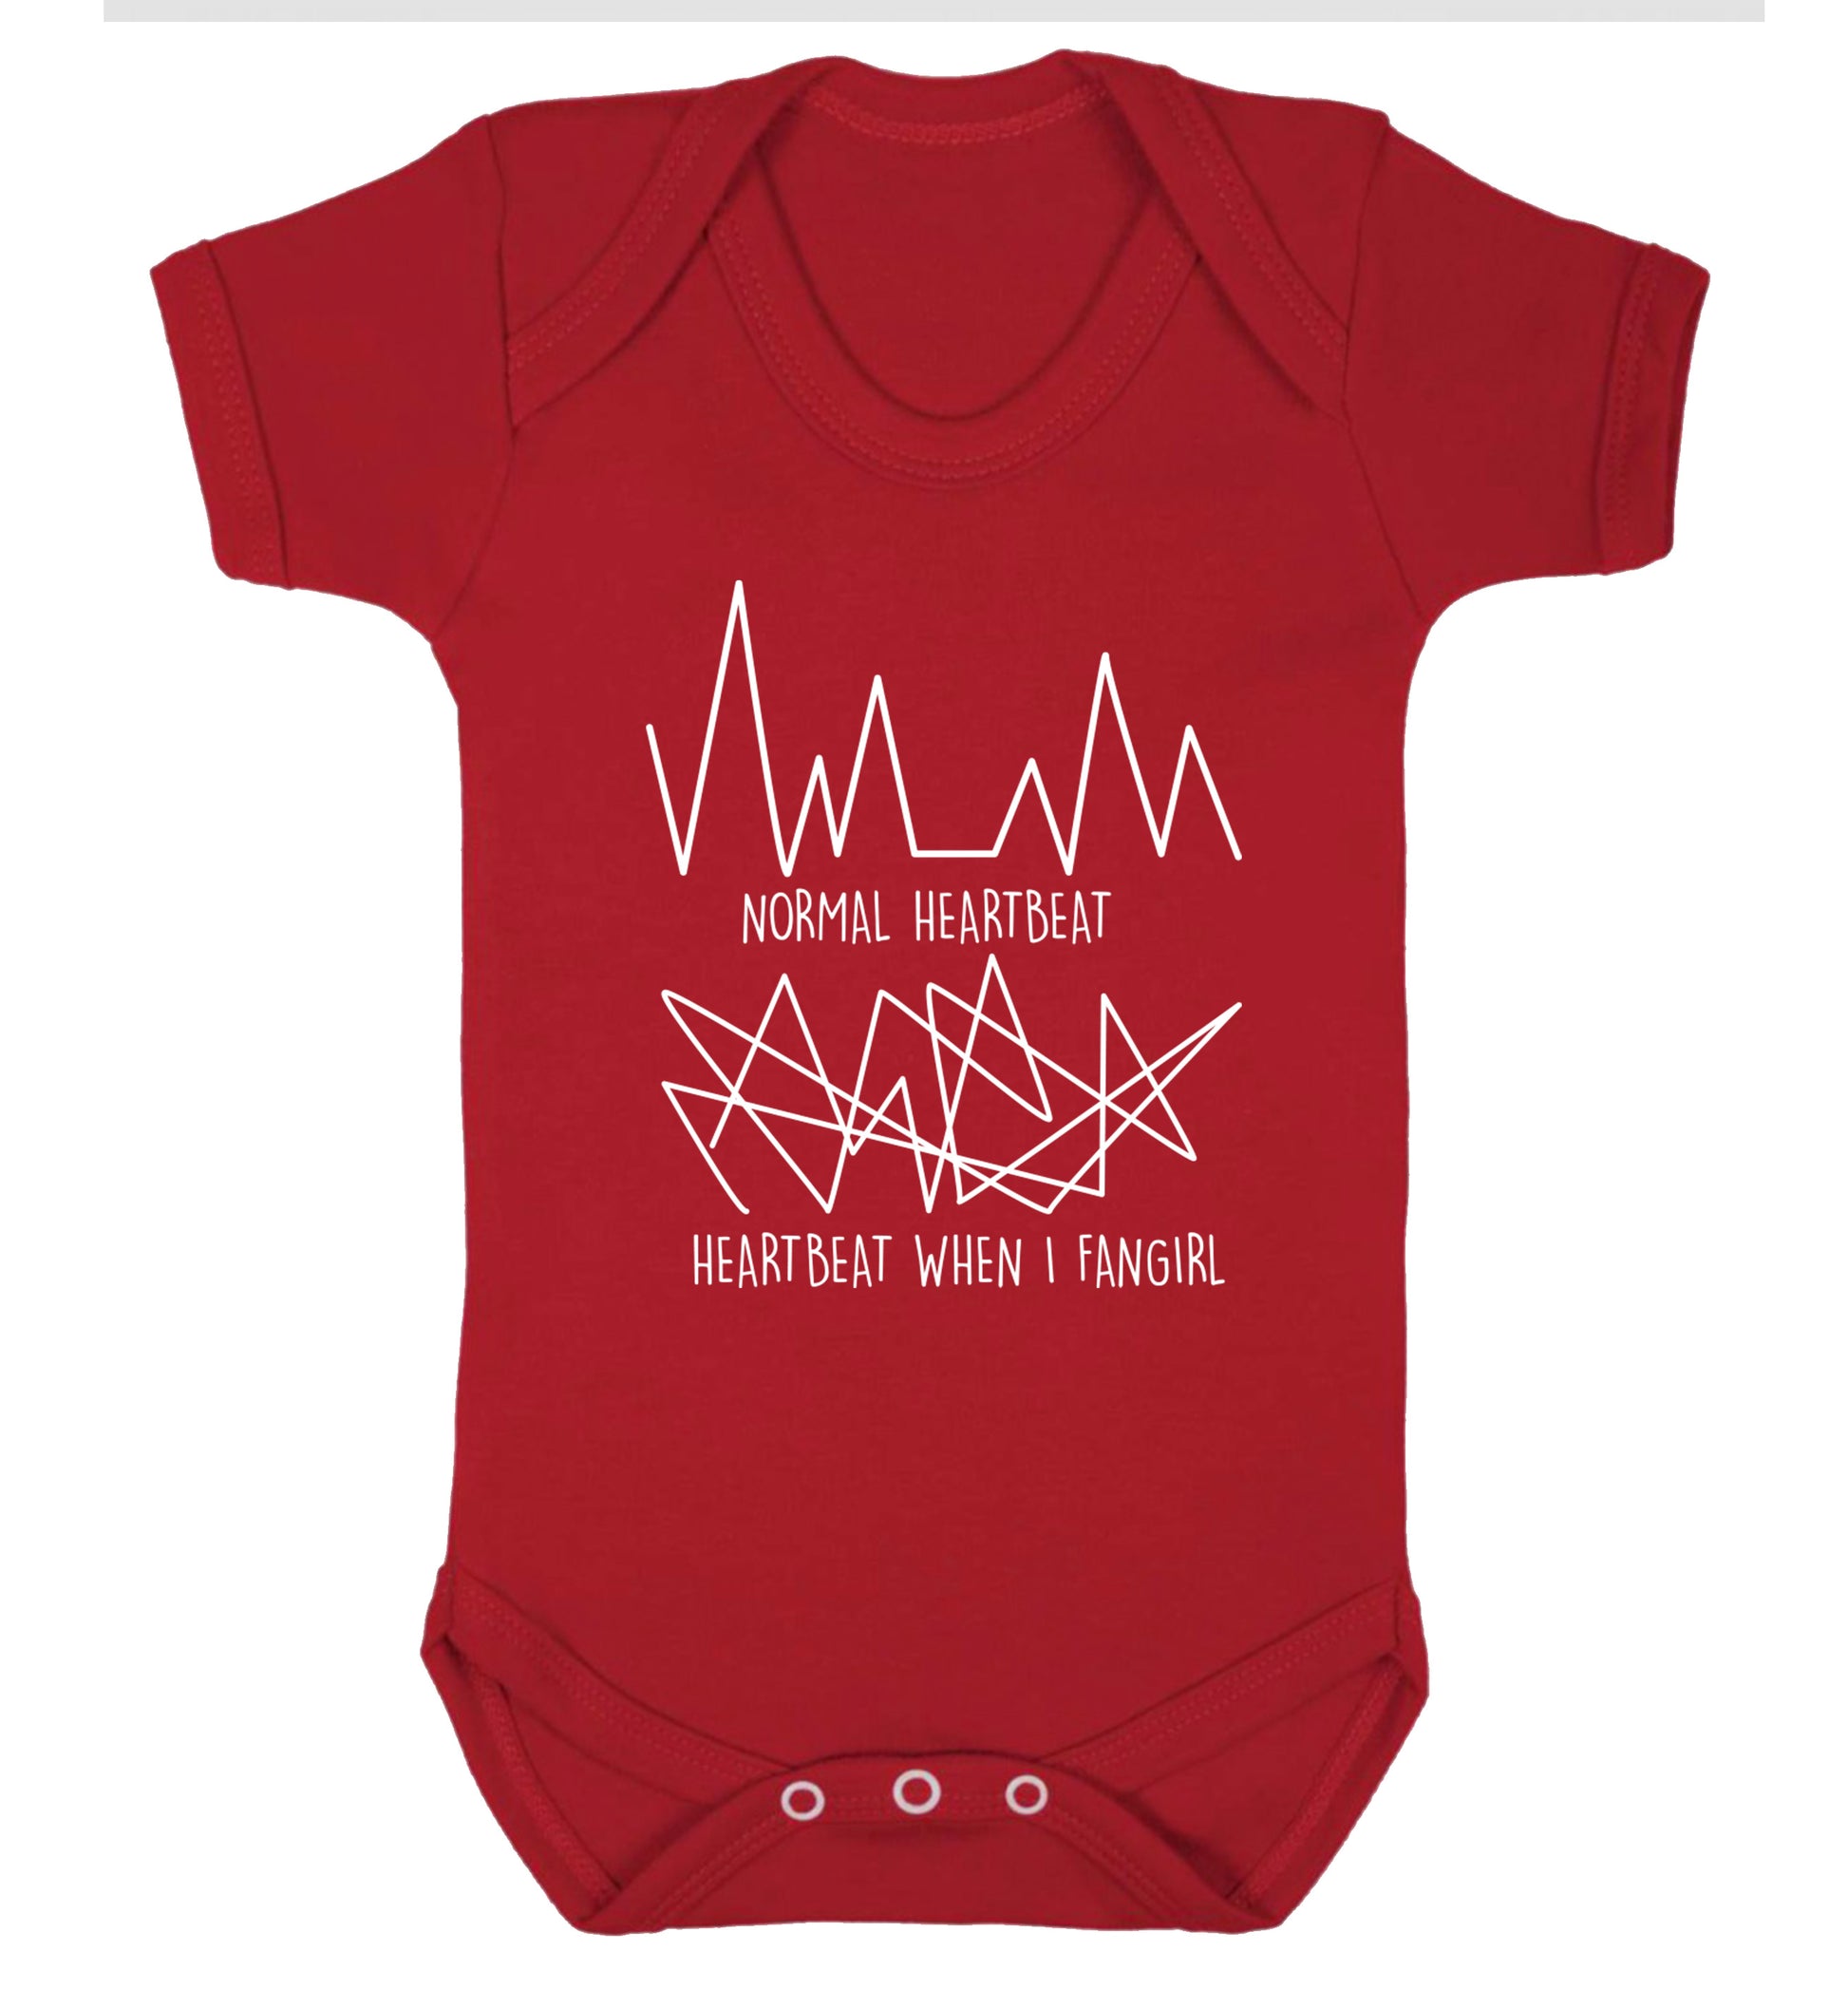 Normal heartbeat heartbeat when I fangirl Baby Vest red 18-24 months